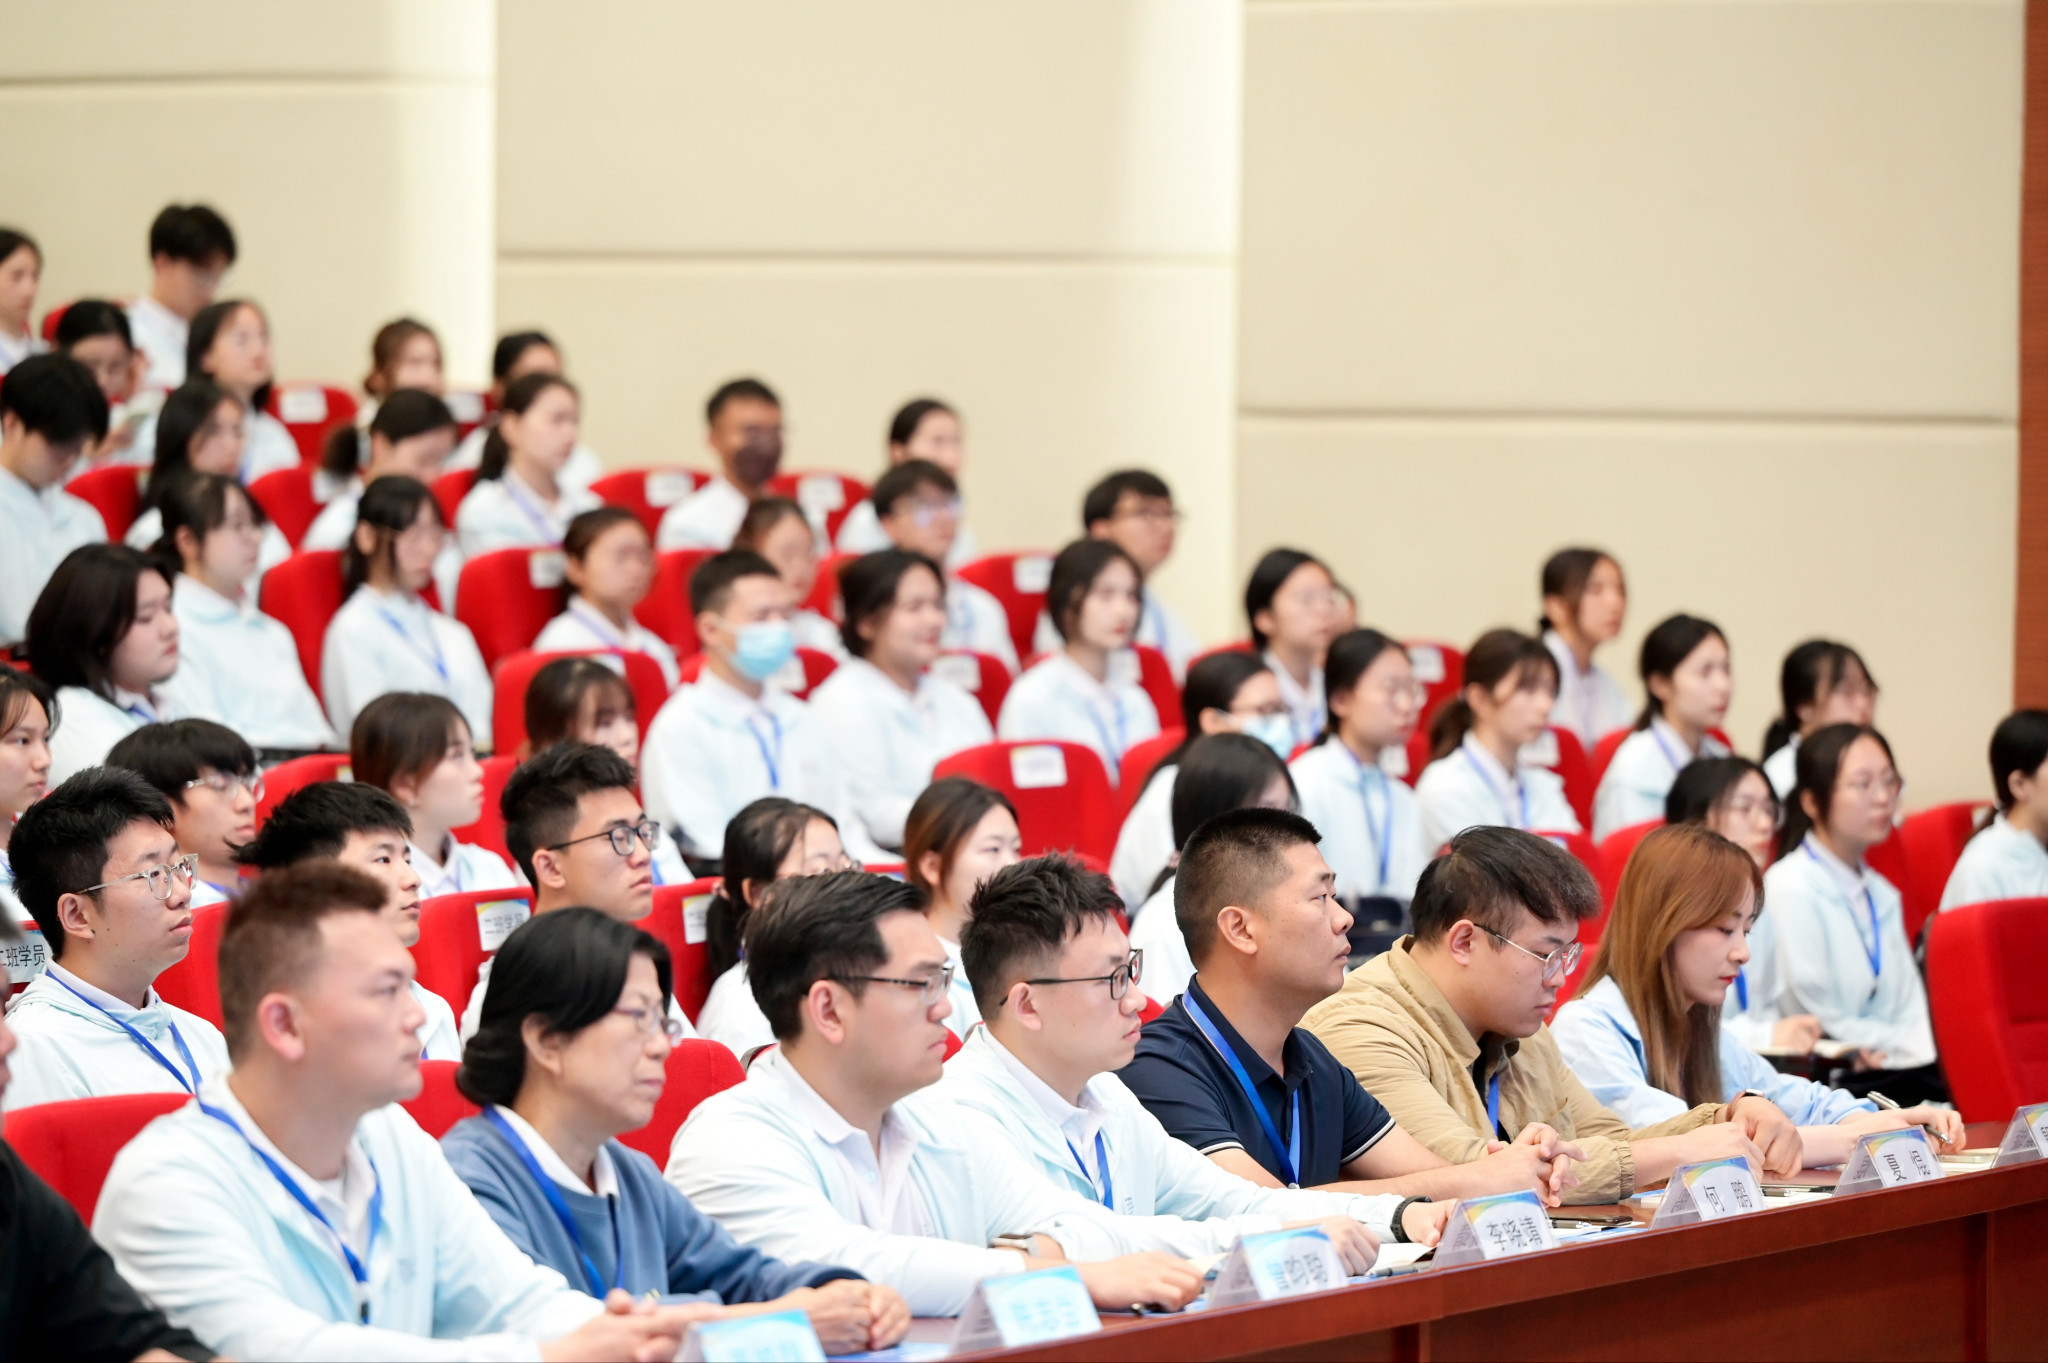 Chengdu 2021 holds training sessions for volunteers